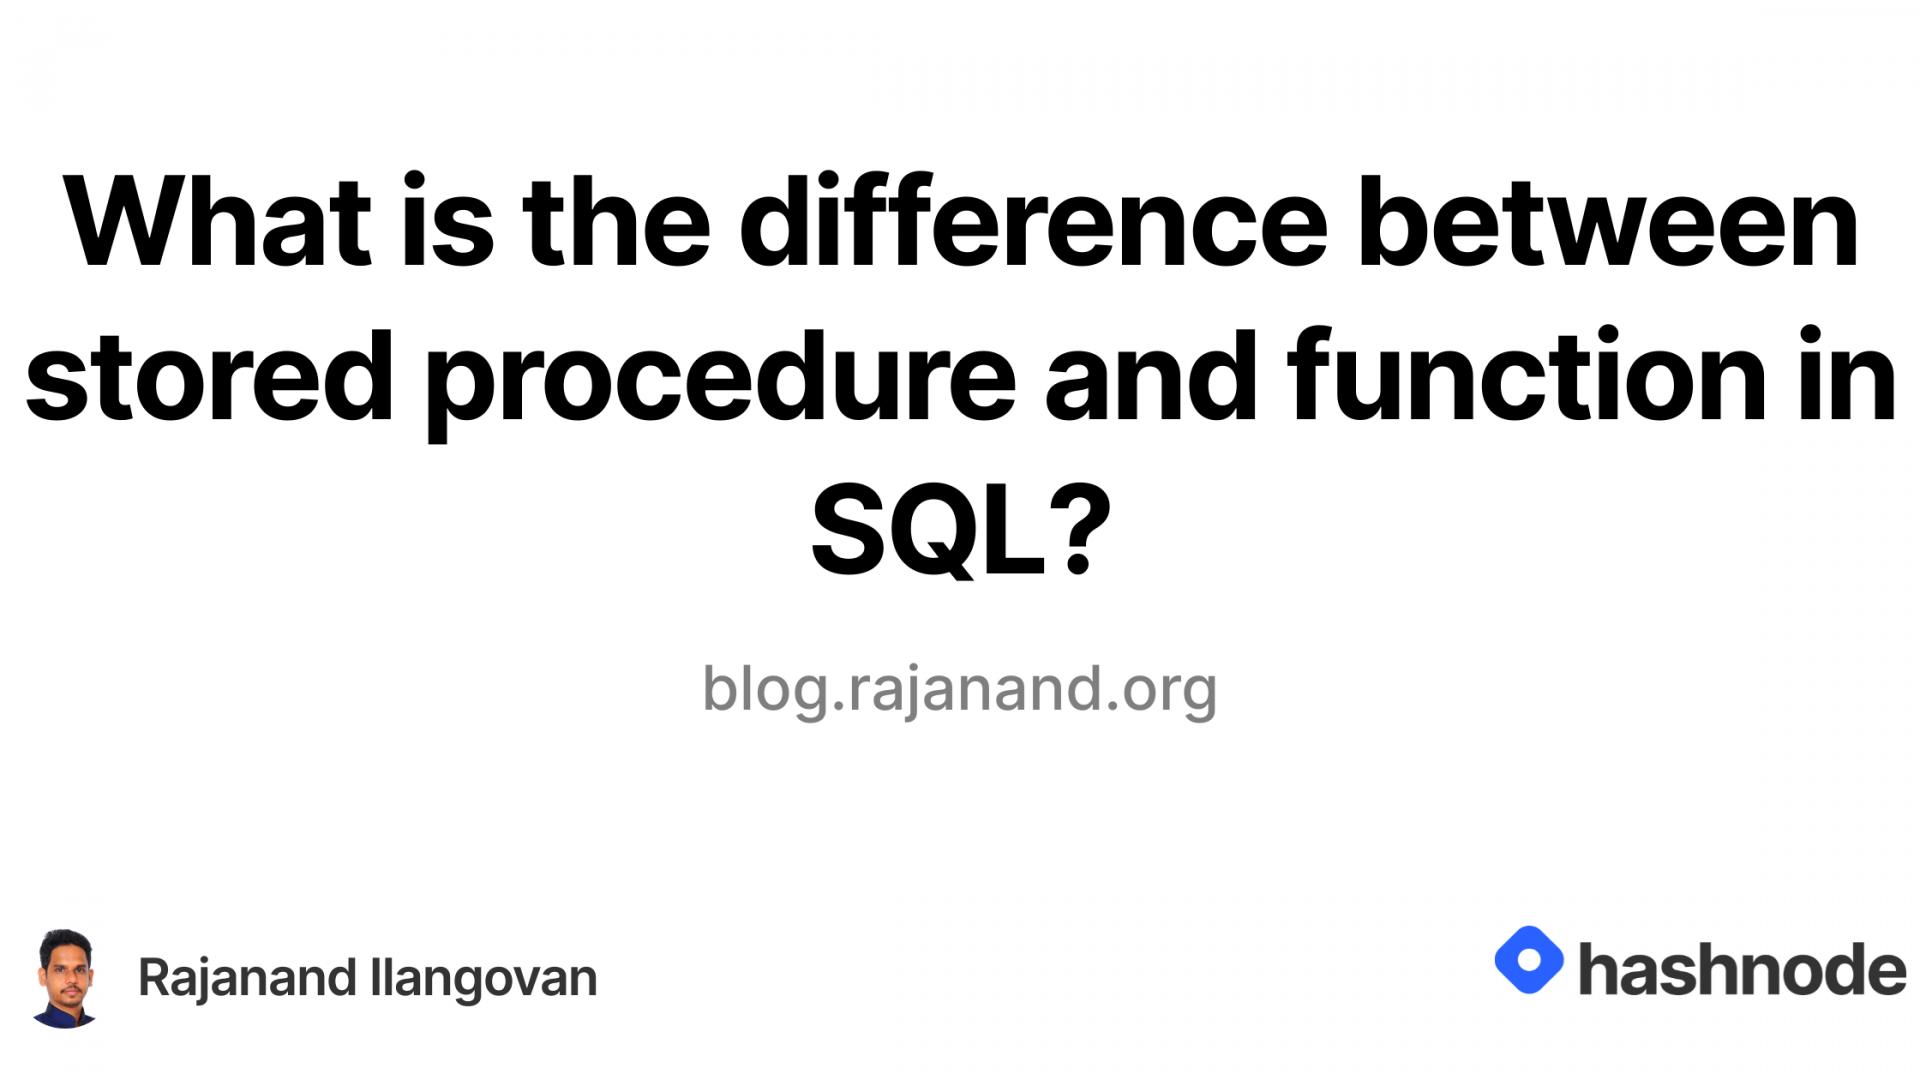 What is the difference between stored procedure and function in SQL?